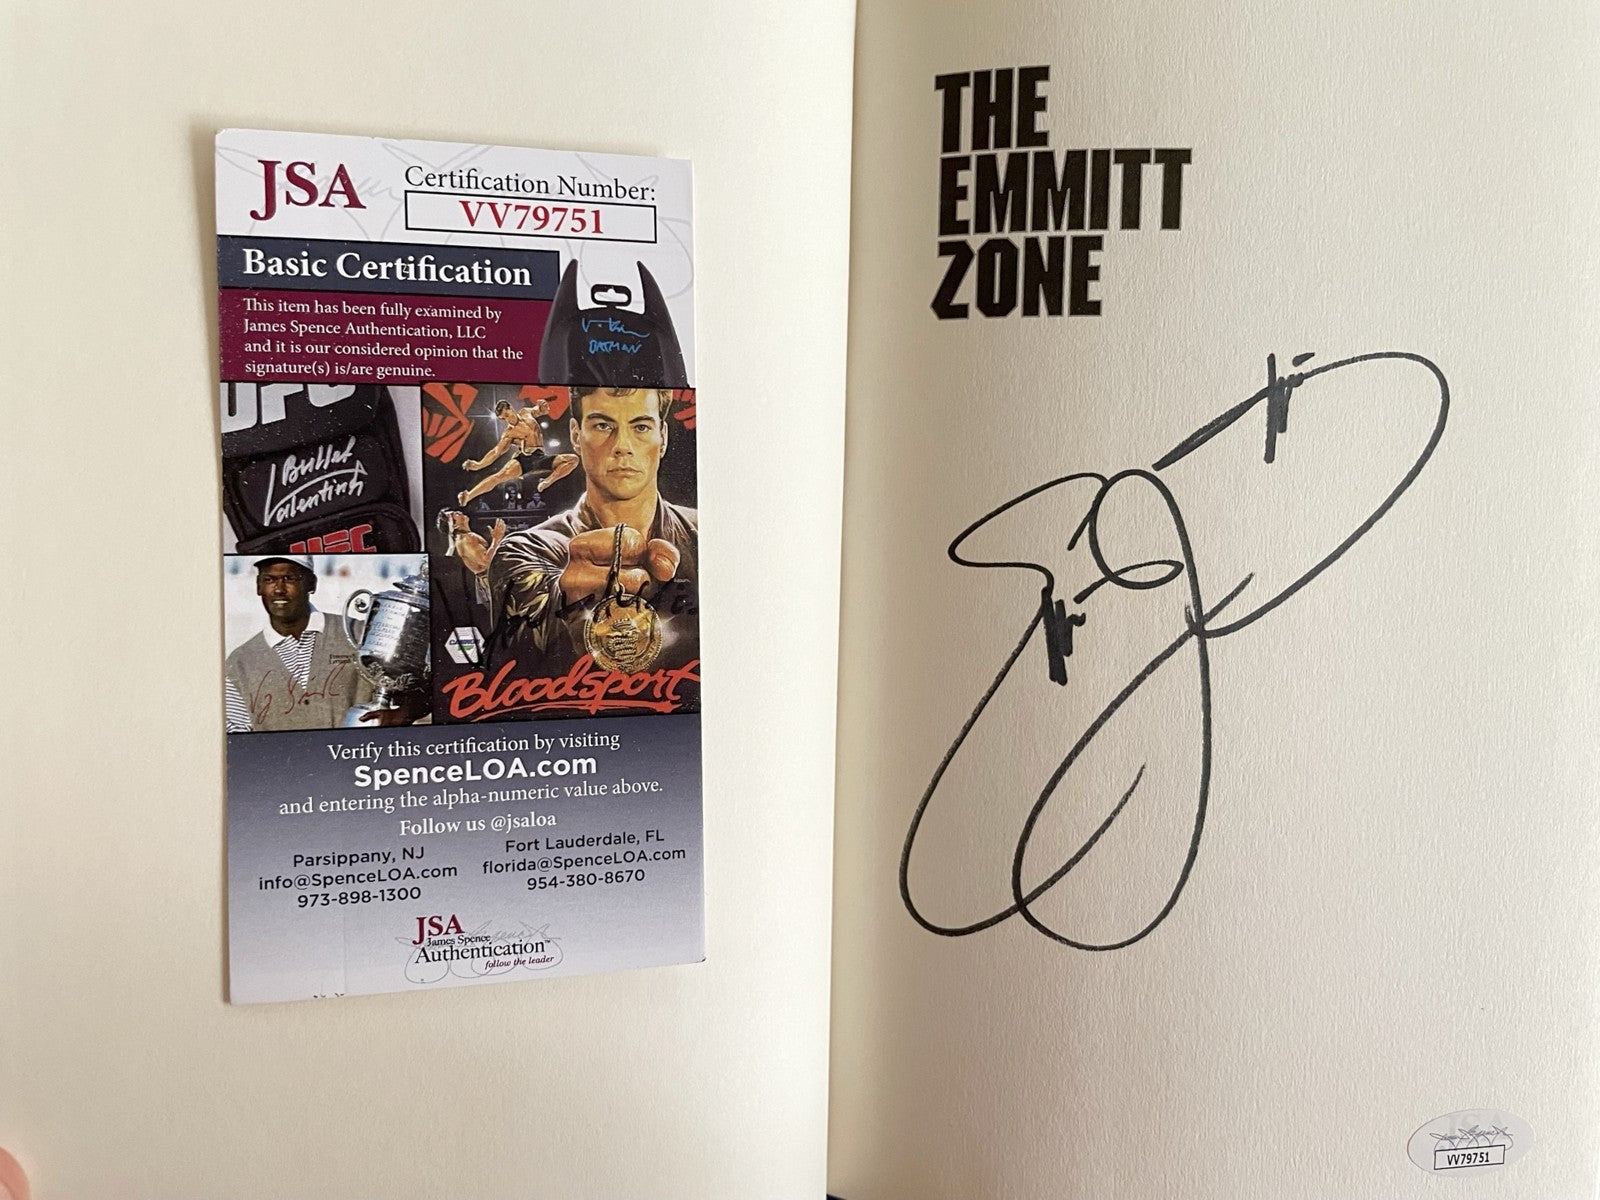 Emmitt Smith autographed Emmitt Zone hardcover first edition book JSA